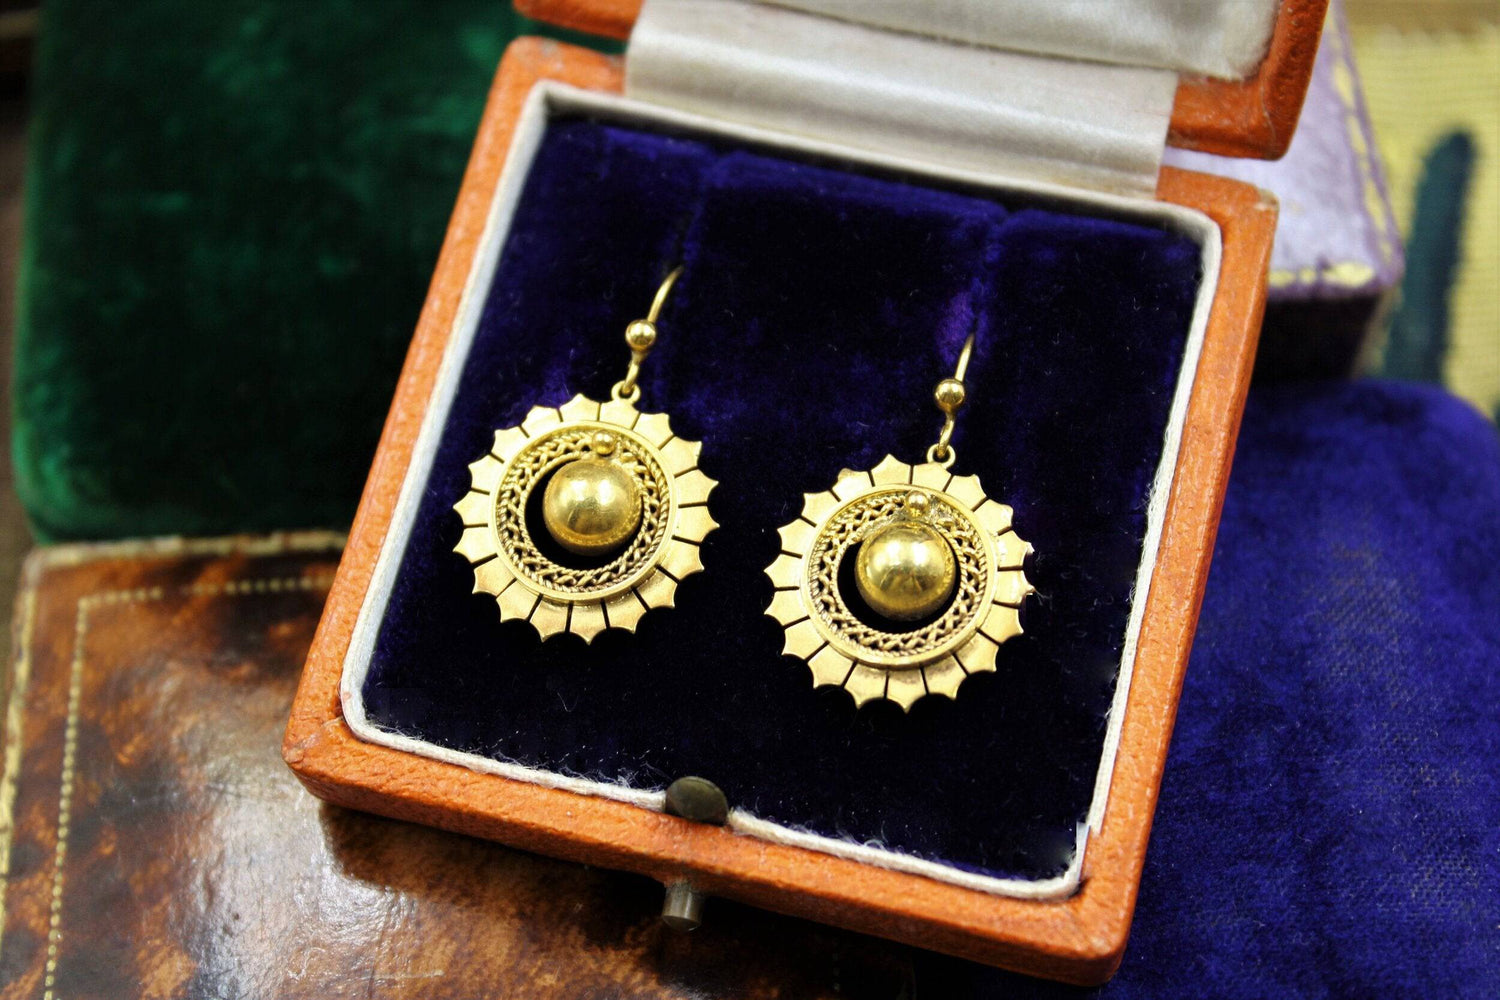 A very fine pair of Victorian Drop Earrings set in 15ct Yellow Gold, English, Circa 1900 - Robin Haydock Antiques